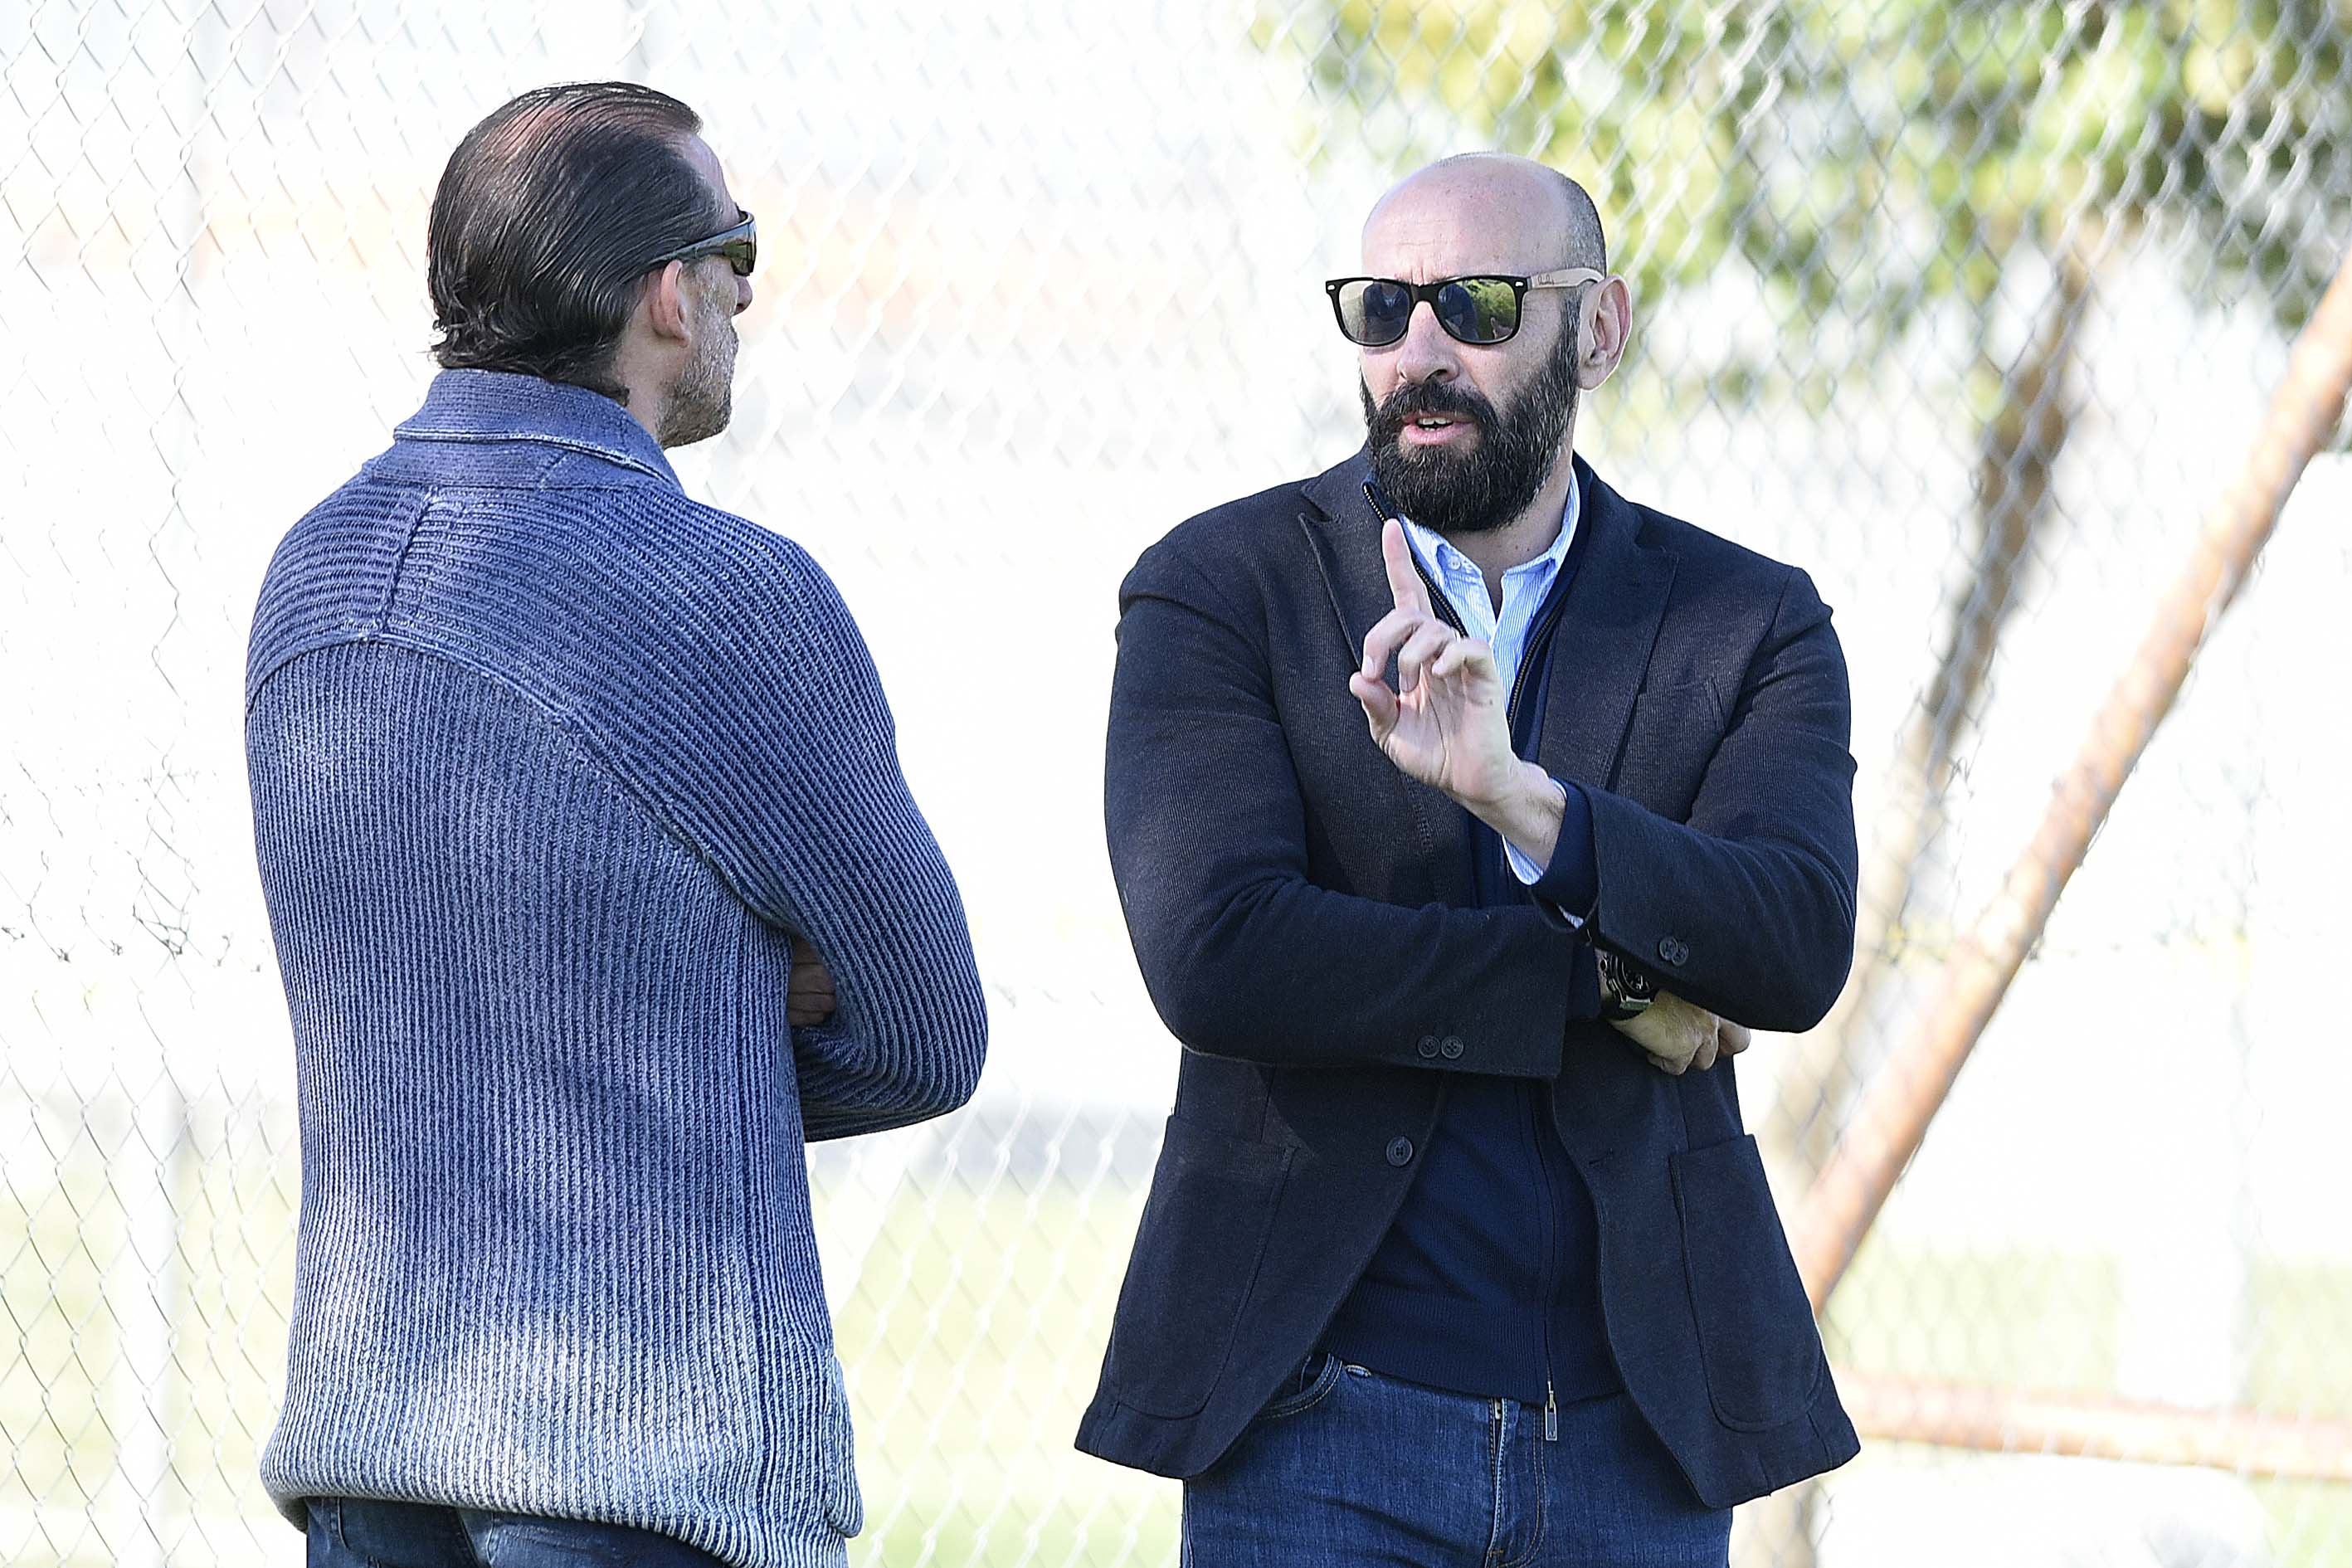 Monchi and Óscar Arias at the training session